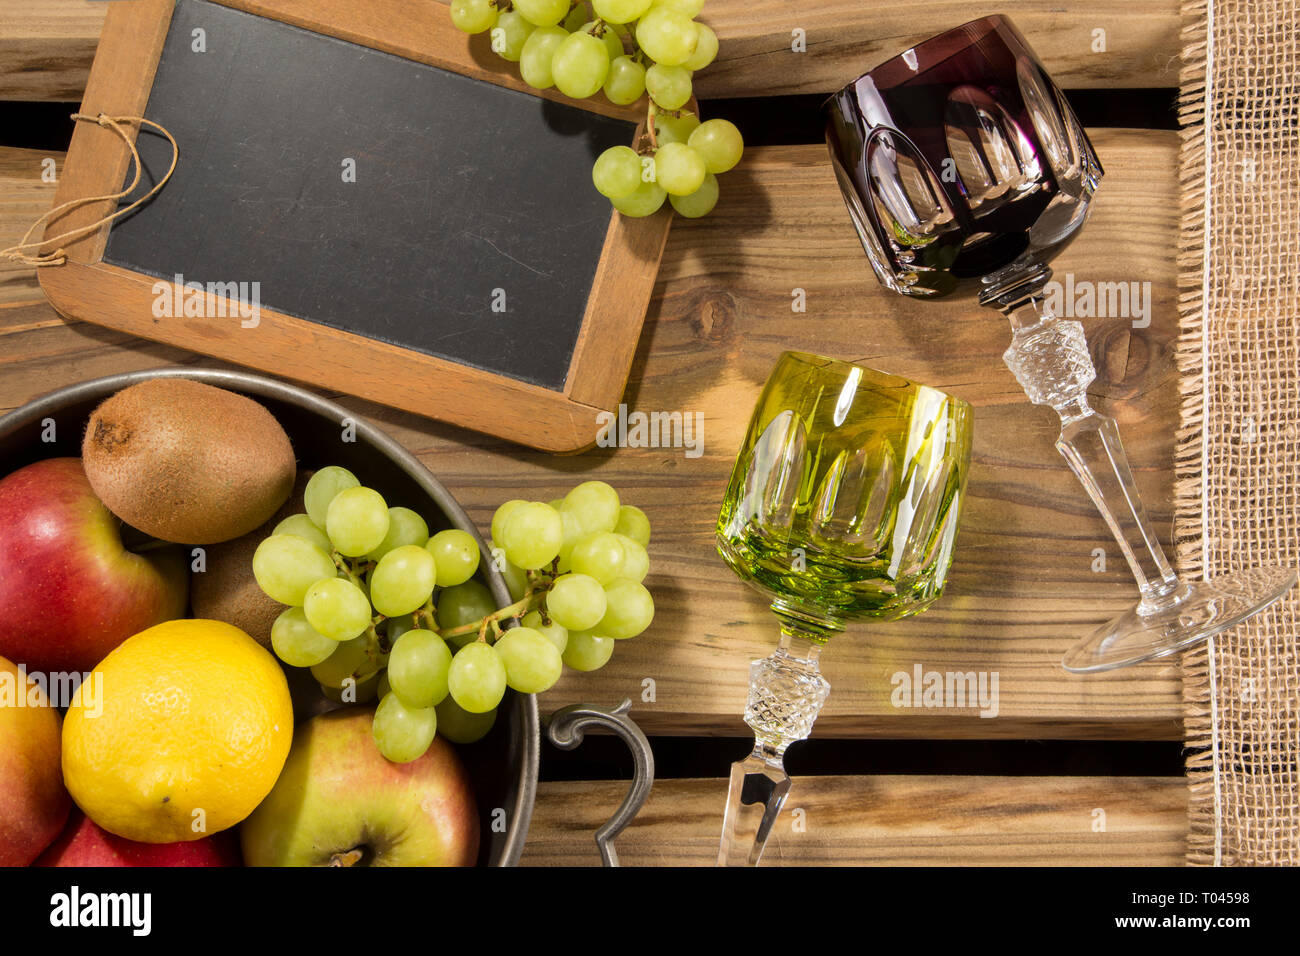 Traditional rummers/wine glasses on rustic wood planks and arranged fruits in a bowl, chalkboard and jute cloth. For wine menu or restaurant. Stock Photo